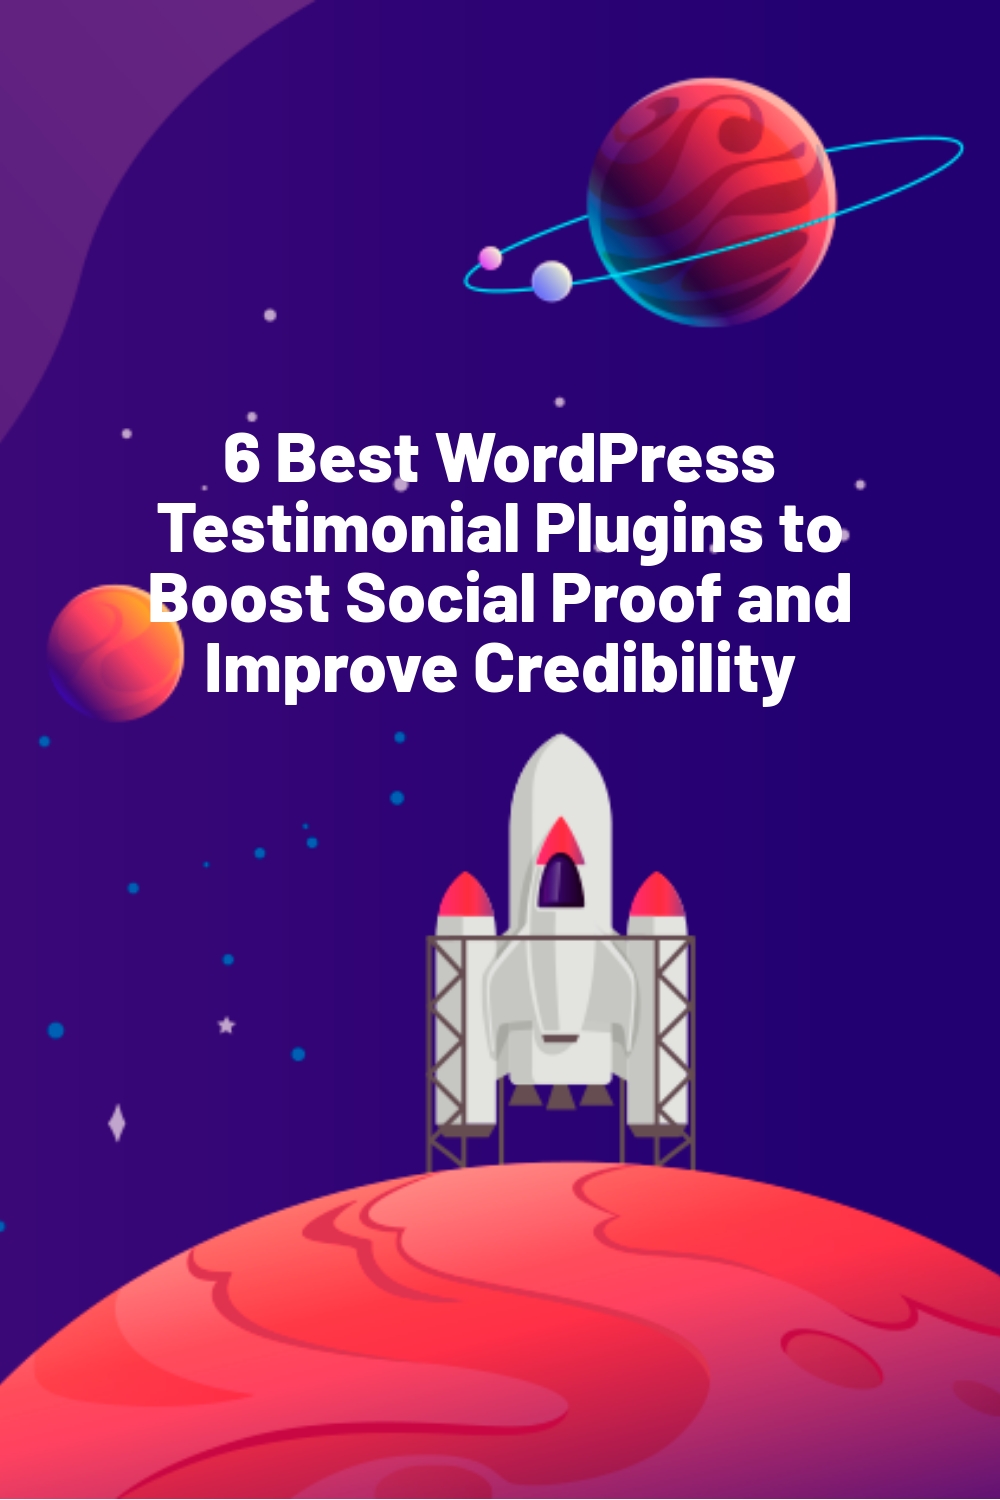 6 Best WordPress Testimonial Plugins to Boost Social Proof and Improve Credibility